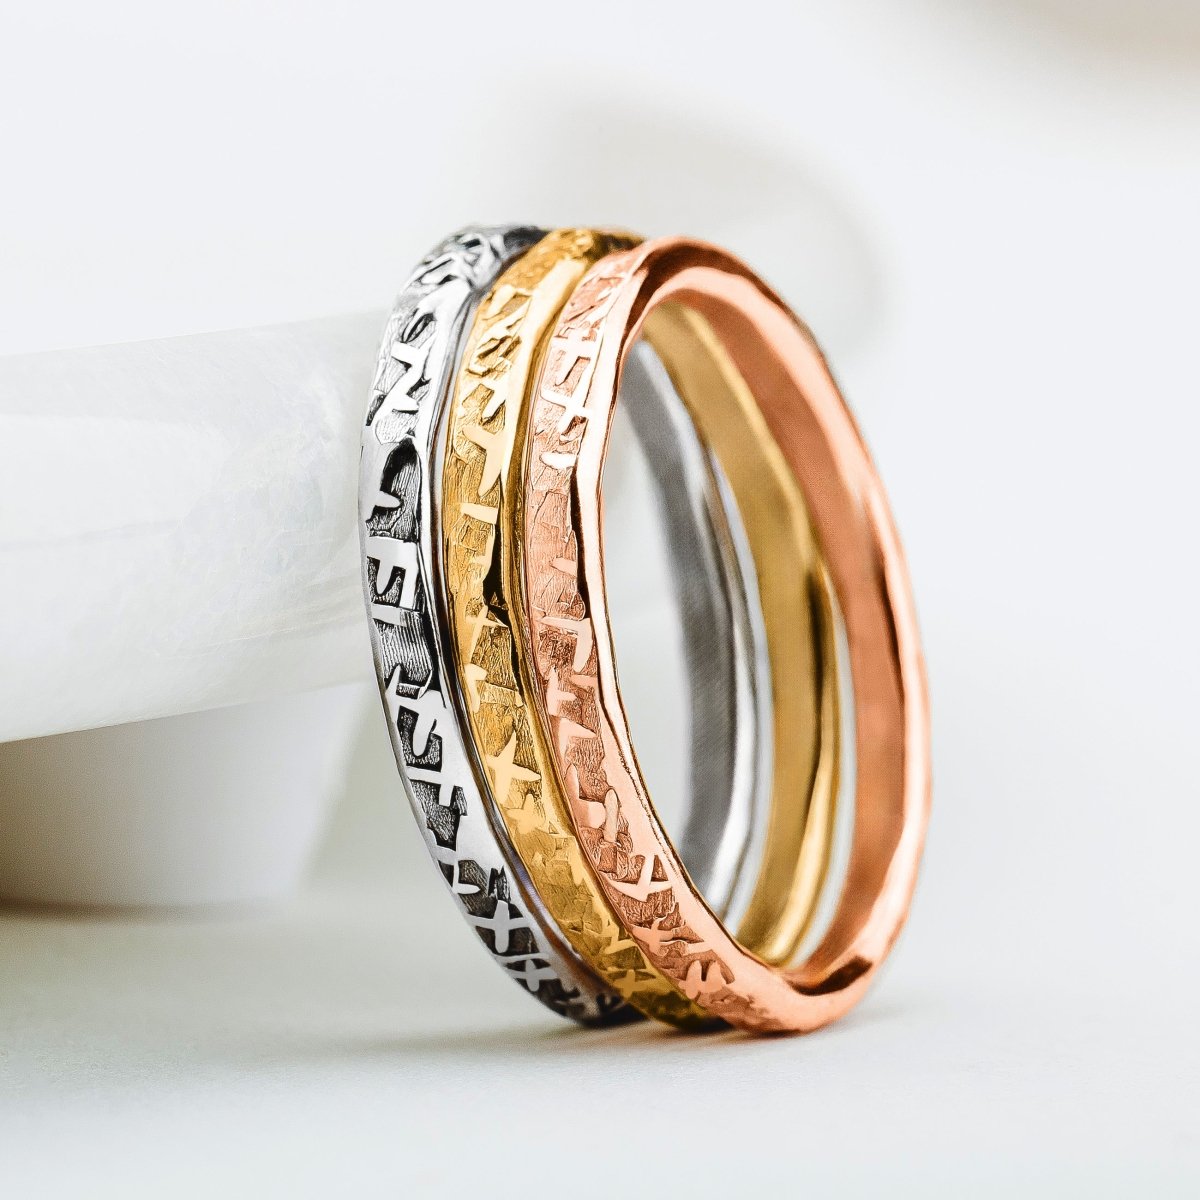 Trio of Raw Silk Stacking Rings